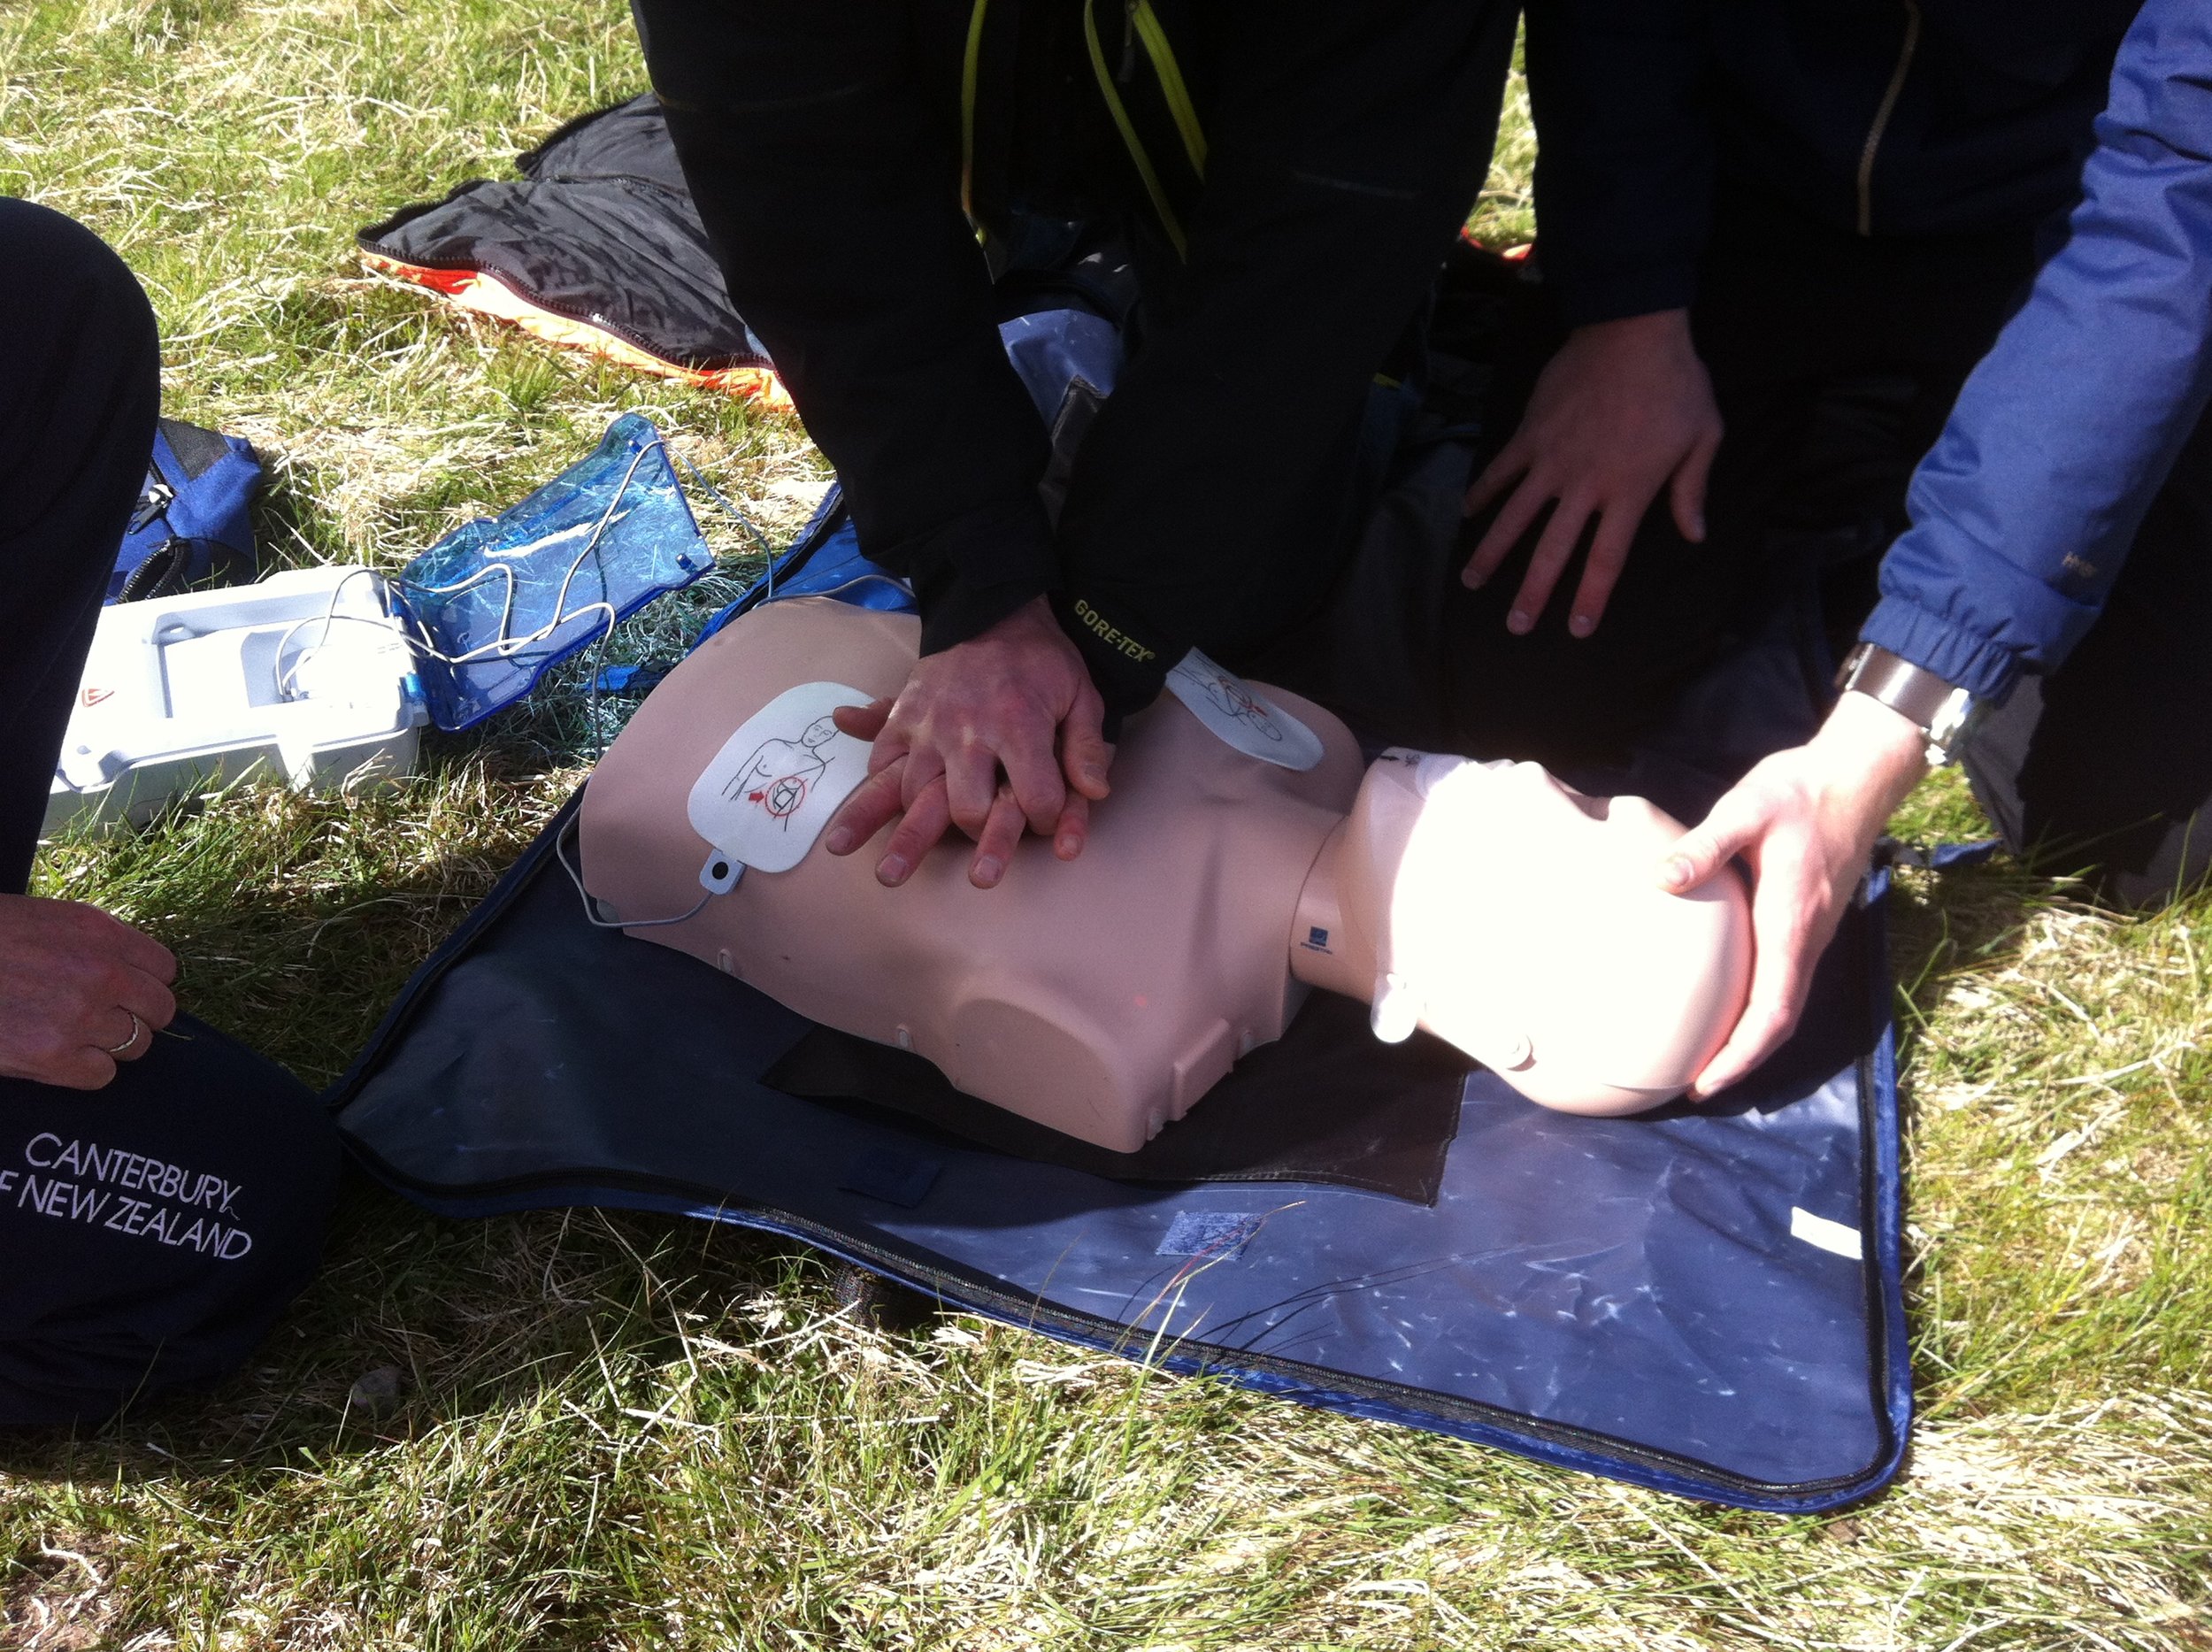 CPR - Chest compressions